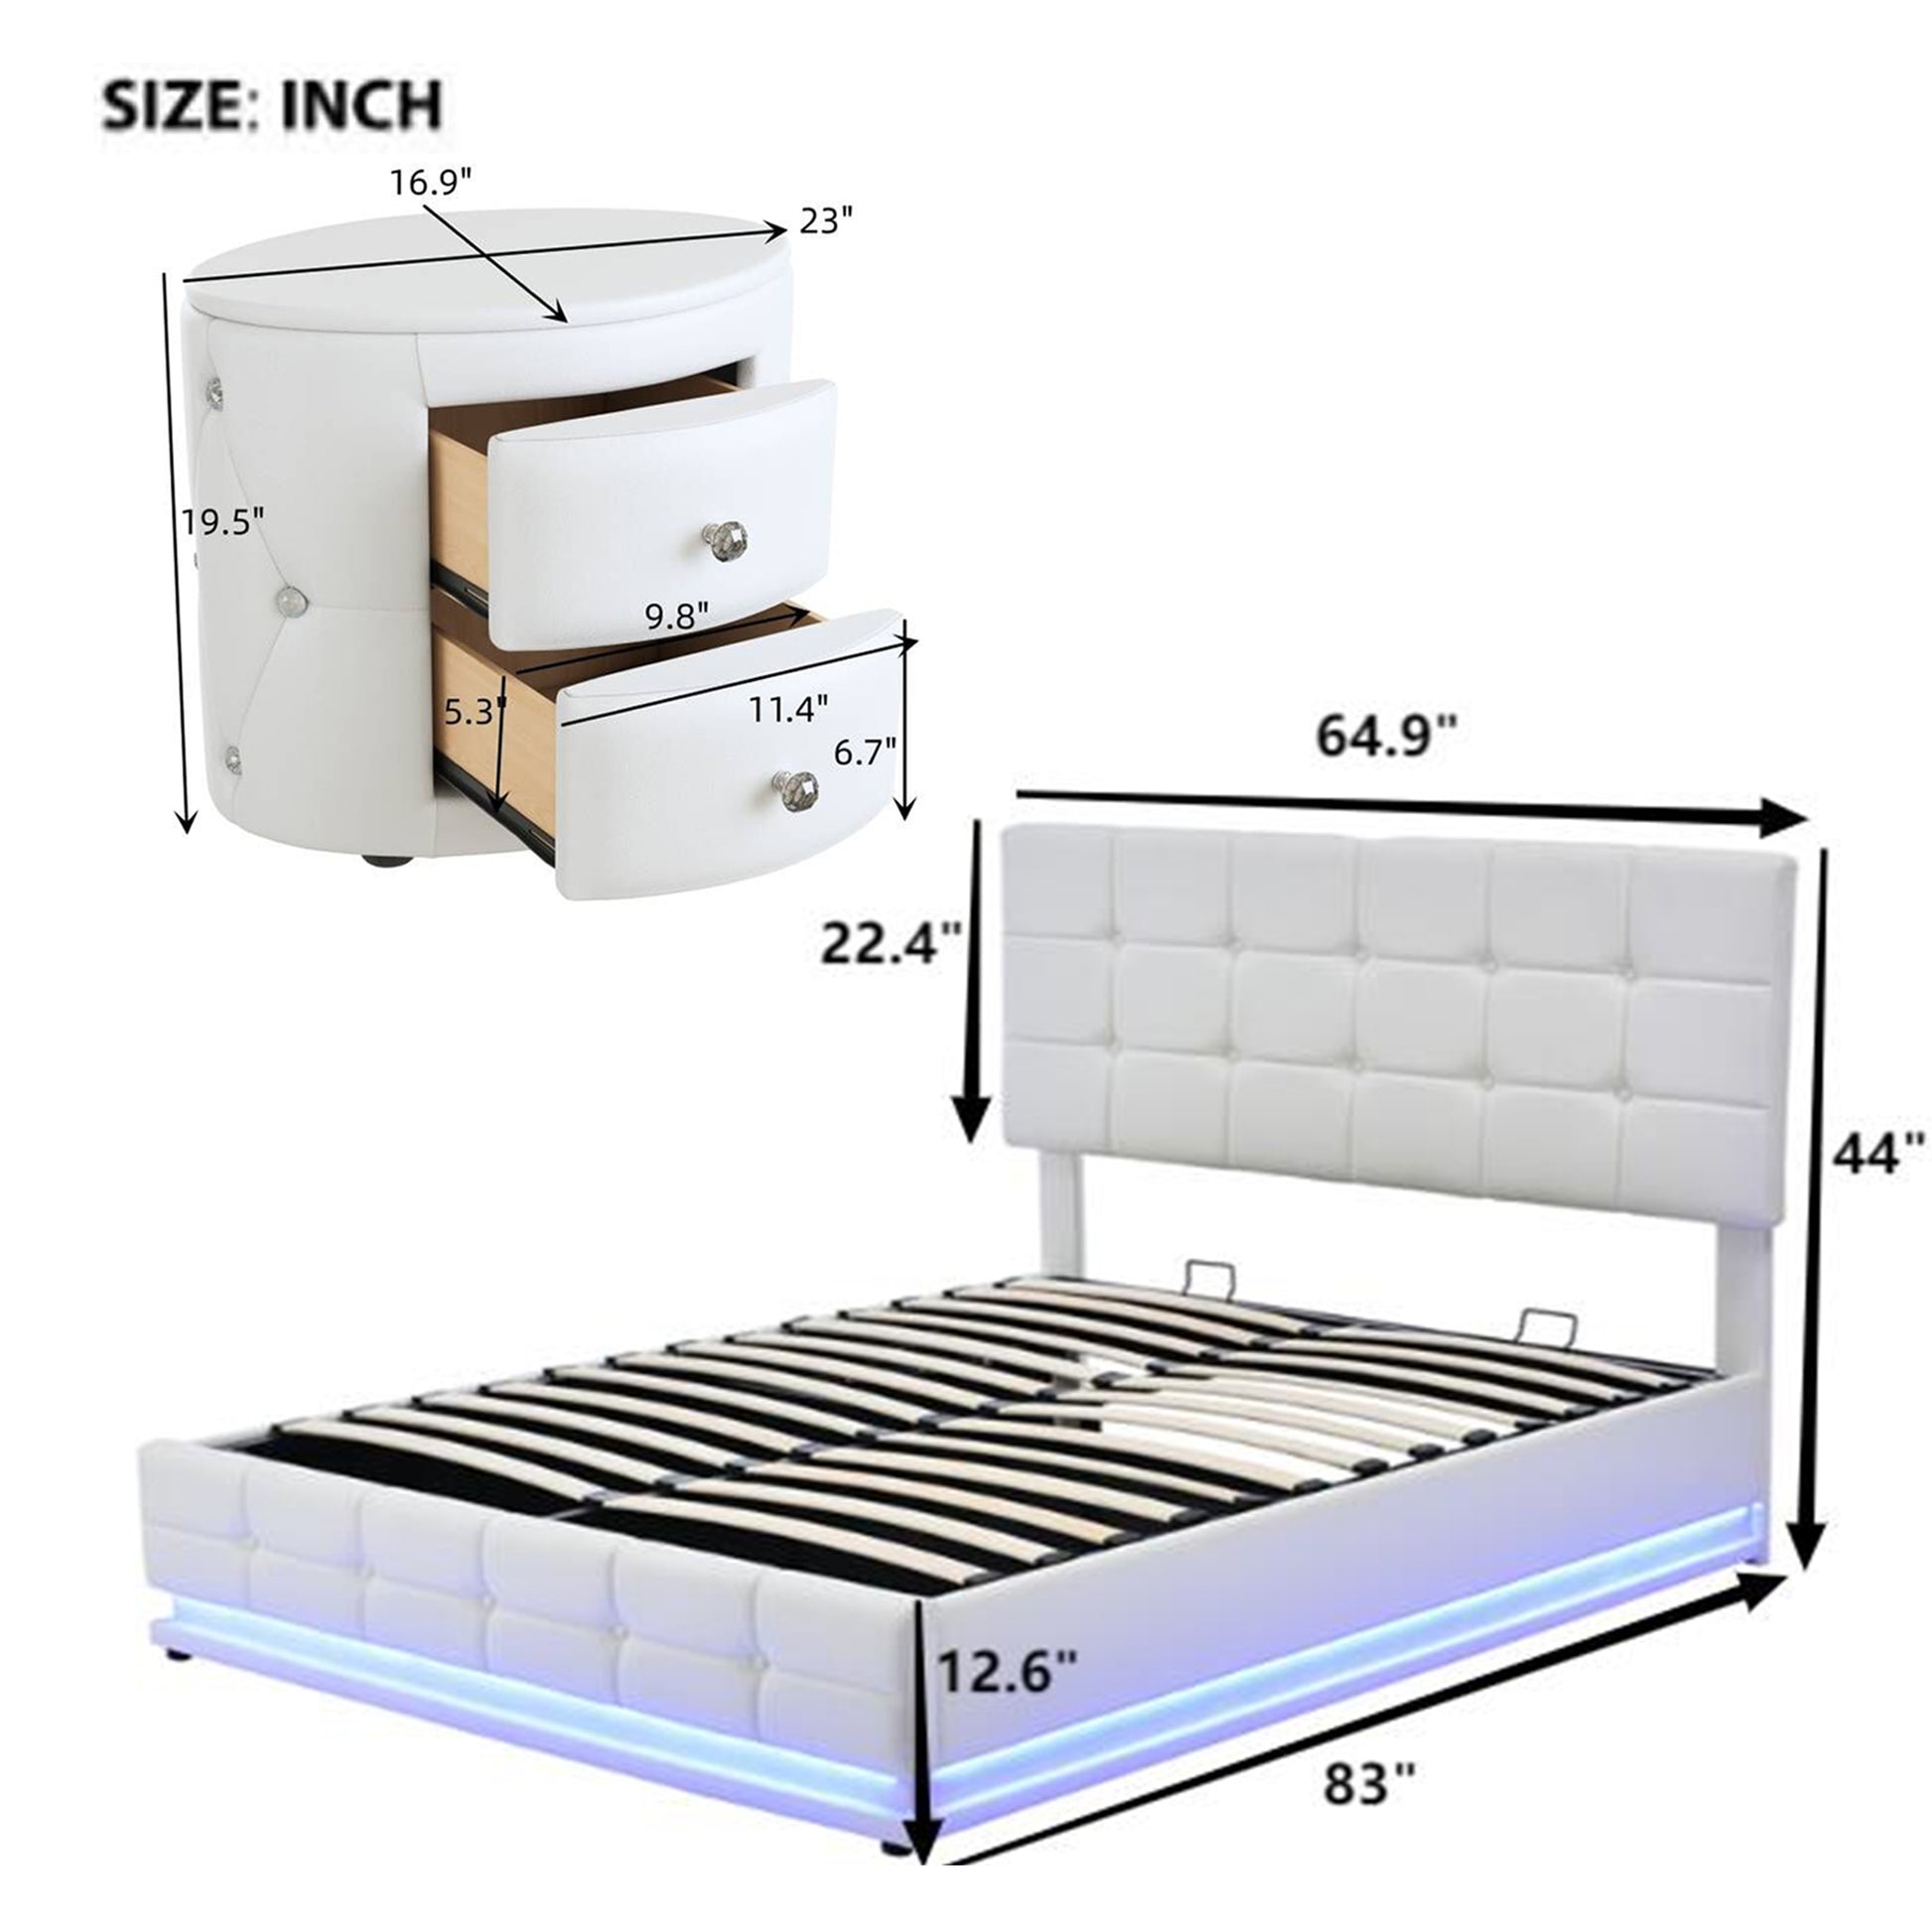 3-Pieces Bedroom Sets,Queen Size Upholstered Bed with LED Lights,Hydraulic Storage System and USB Charging Station, Two Nightstands with Crystal Decoration,White - Enova Luxe Home Store